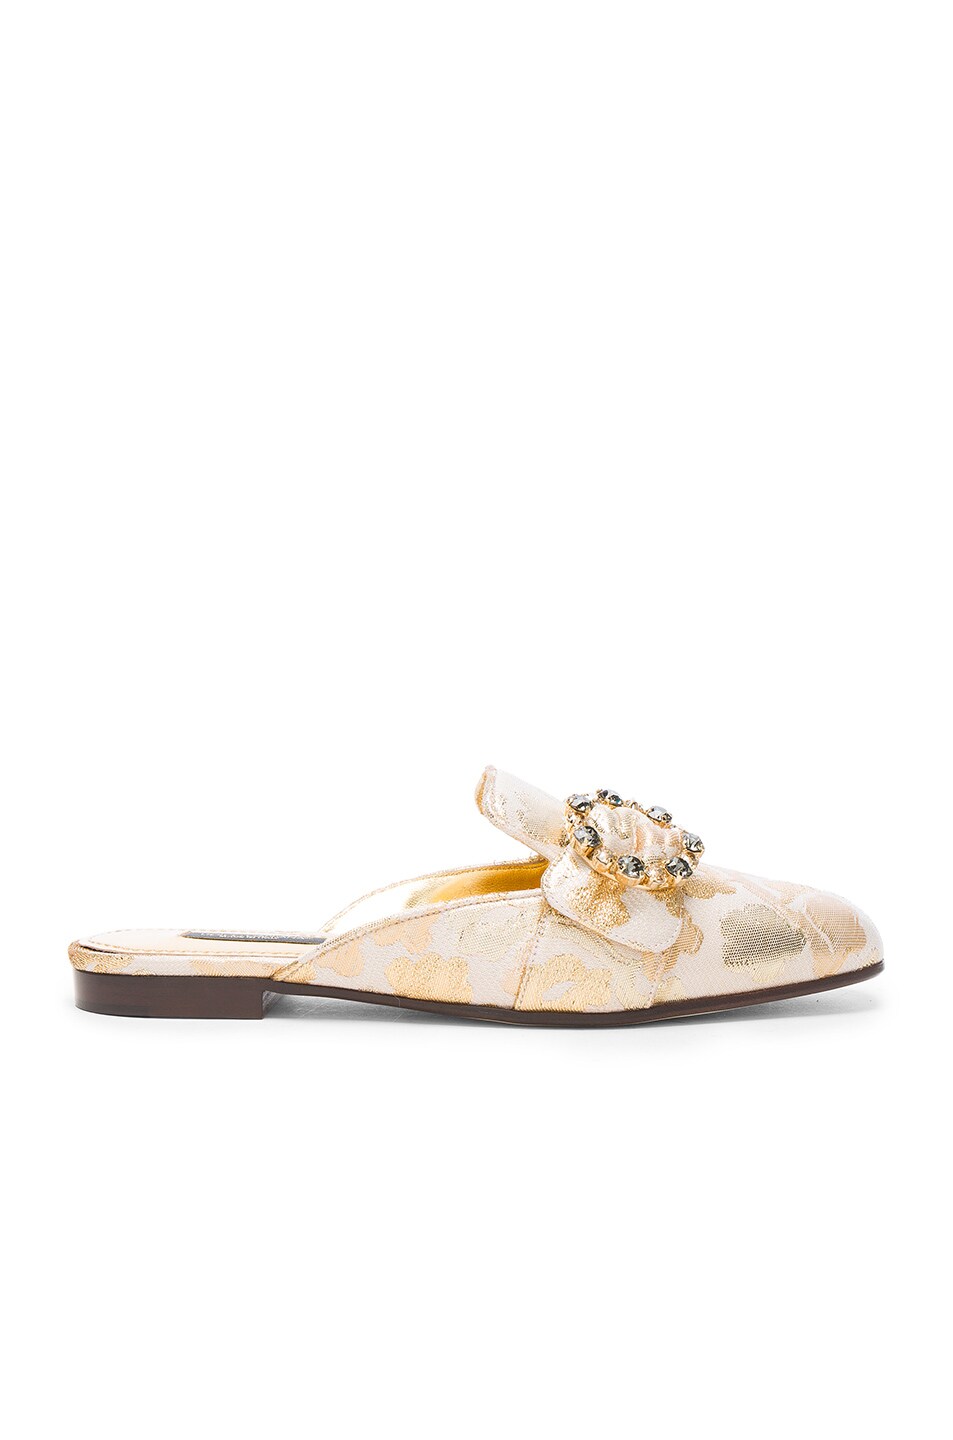 Image 1 of Dolce & Gabbana Brocade Mules in Gold